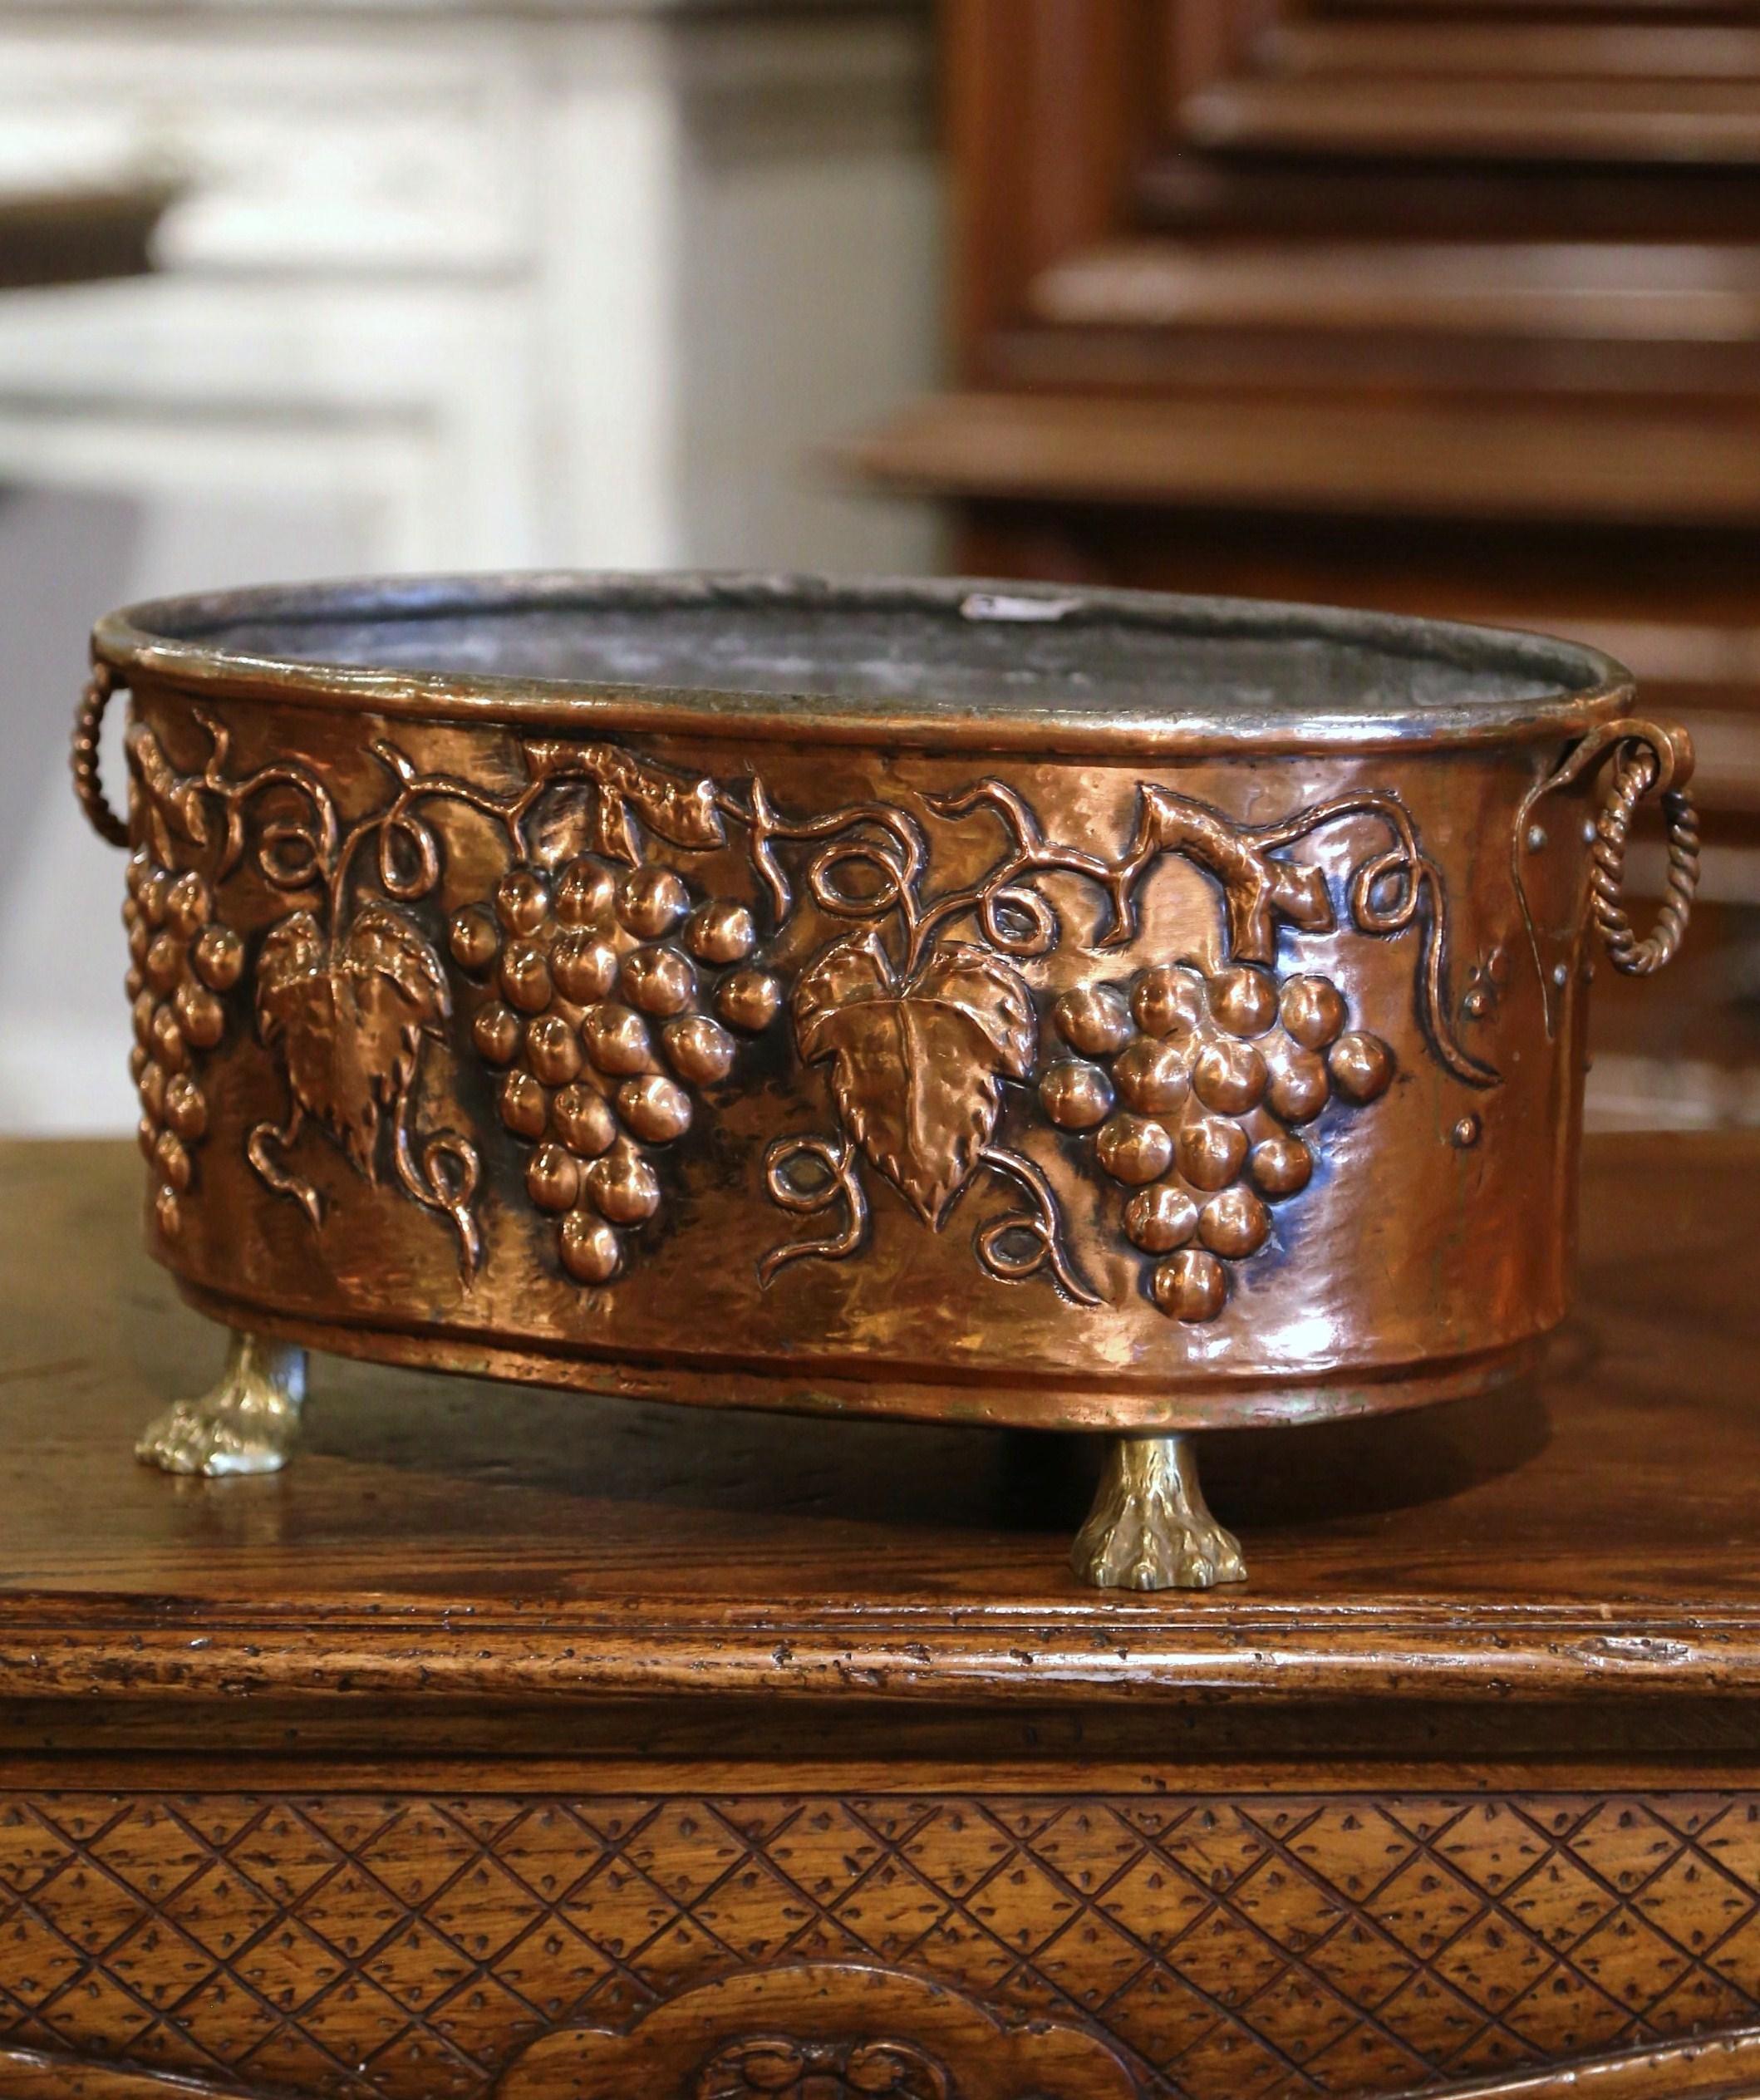 Decorate a wine cellar or wet bar with this elegant antique jardiniere! Crafted in France, circa 1870 and oval in shape, the decorative cache pot stands on small paw feet and features intricate repousse decor of grape, vine and leaf motifs in high